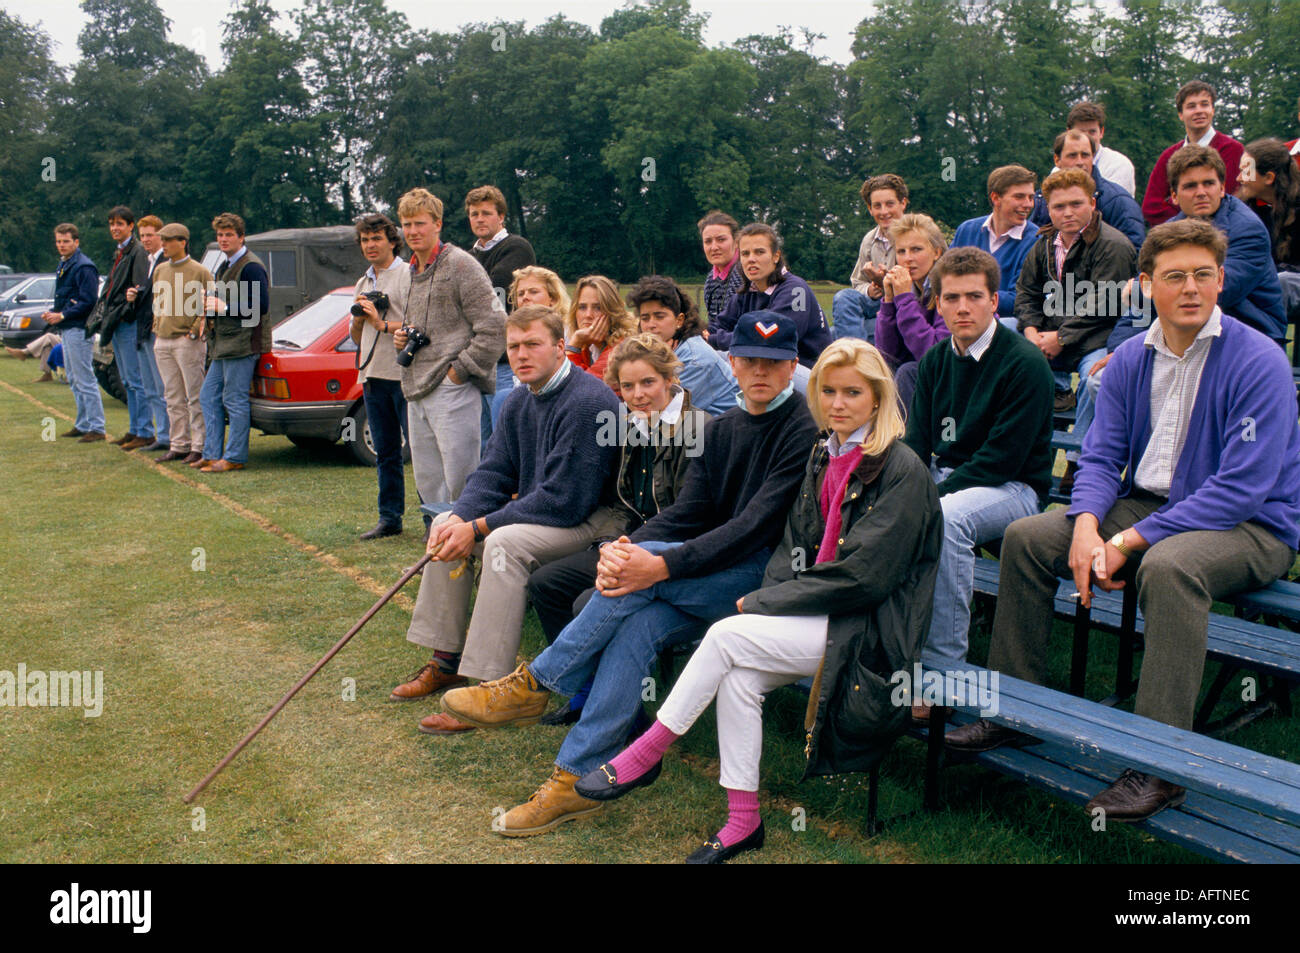 Polo spectators Cirencester Park. Cirencester Royal Agricultural College, Gloucestershire England  13th June 1990 1990s UK HOMER SYKES Stock Photo